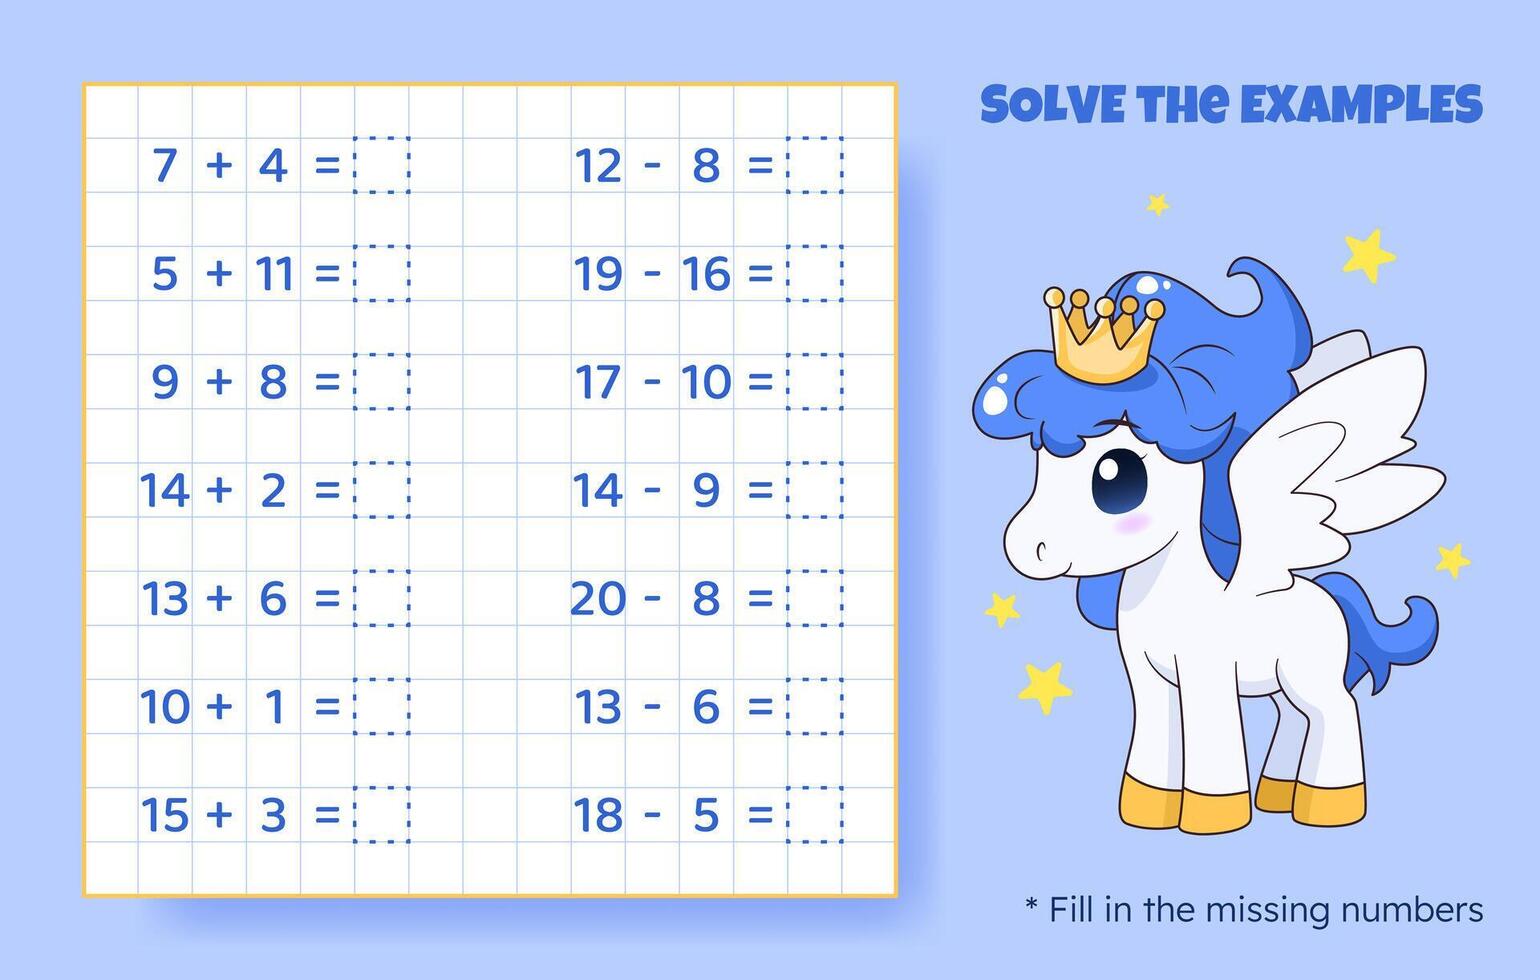 Solve the examples. Addition and subtraction up to 20. Mathematical puzzle game. Worksheet for school, preschool kids. Vector illustration. Cartoon educational game with cute pony for children.